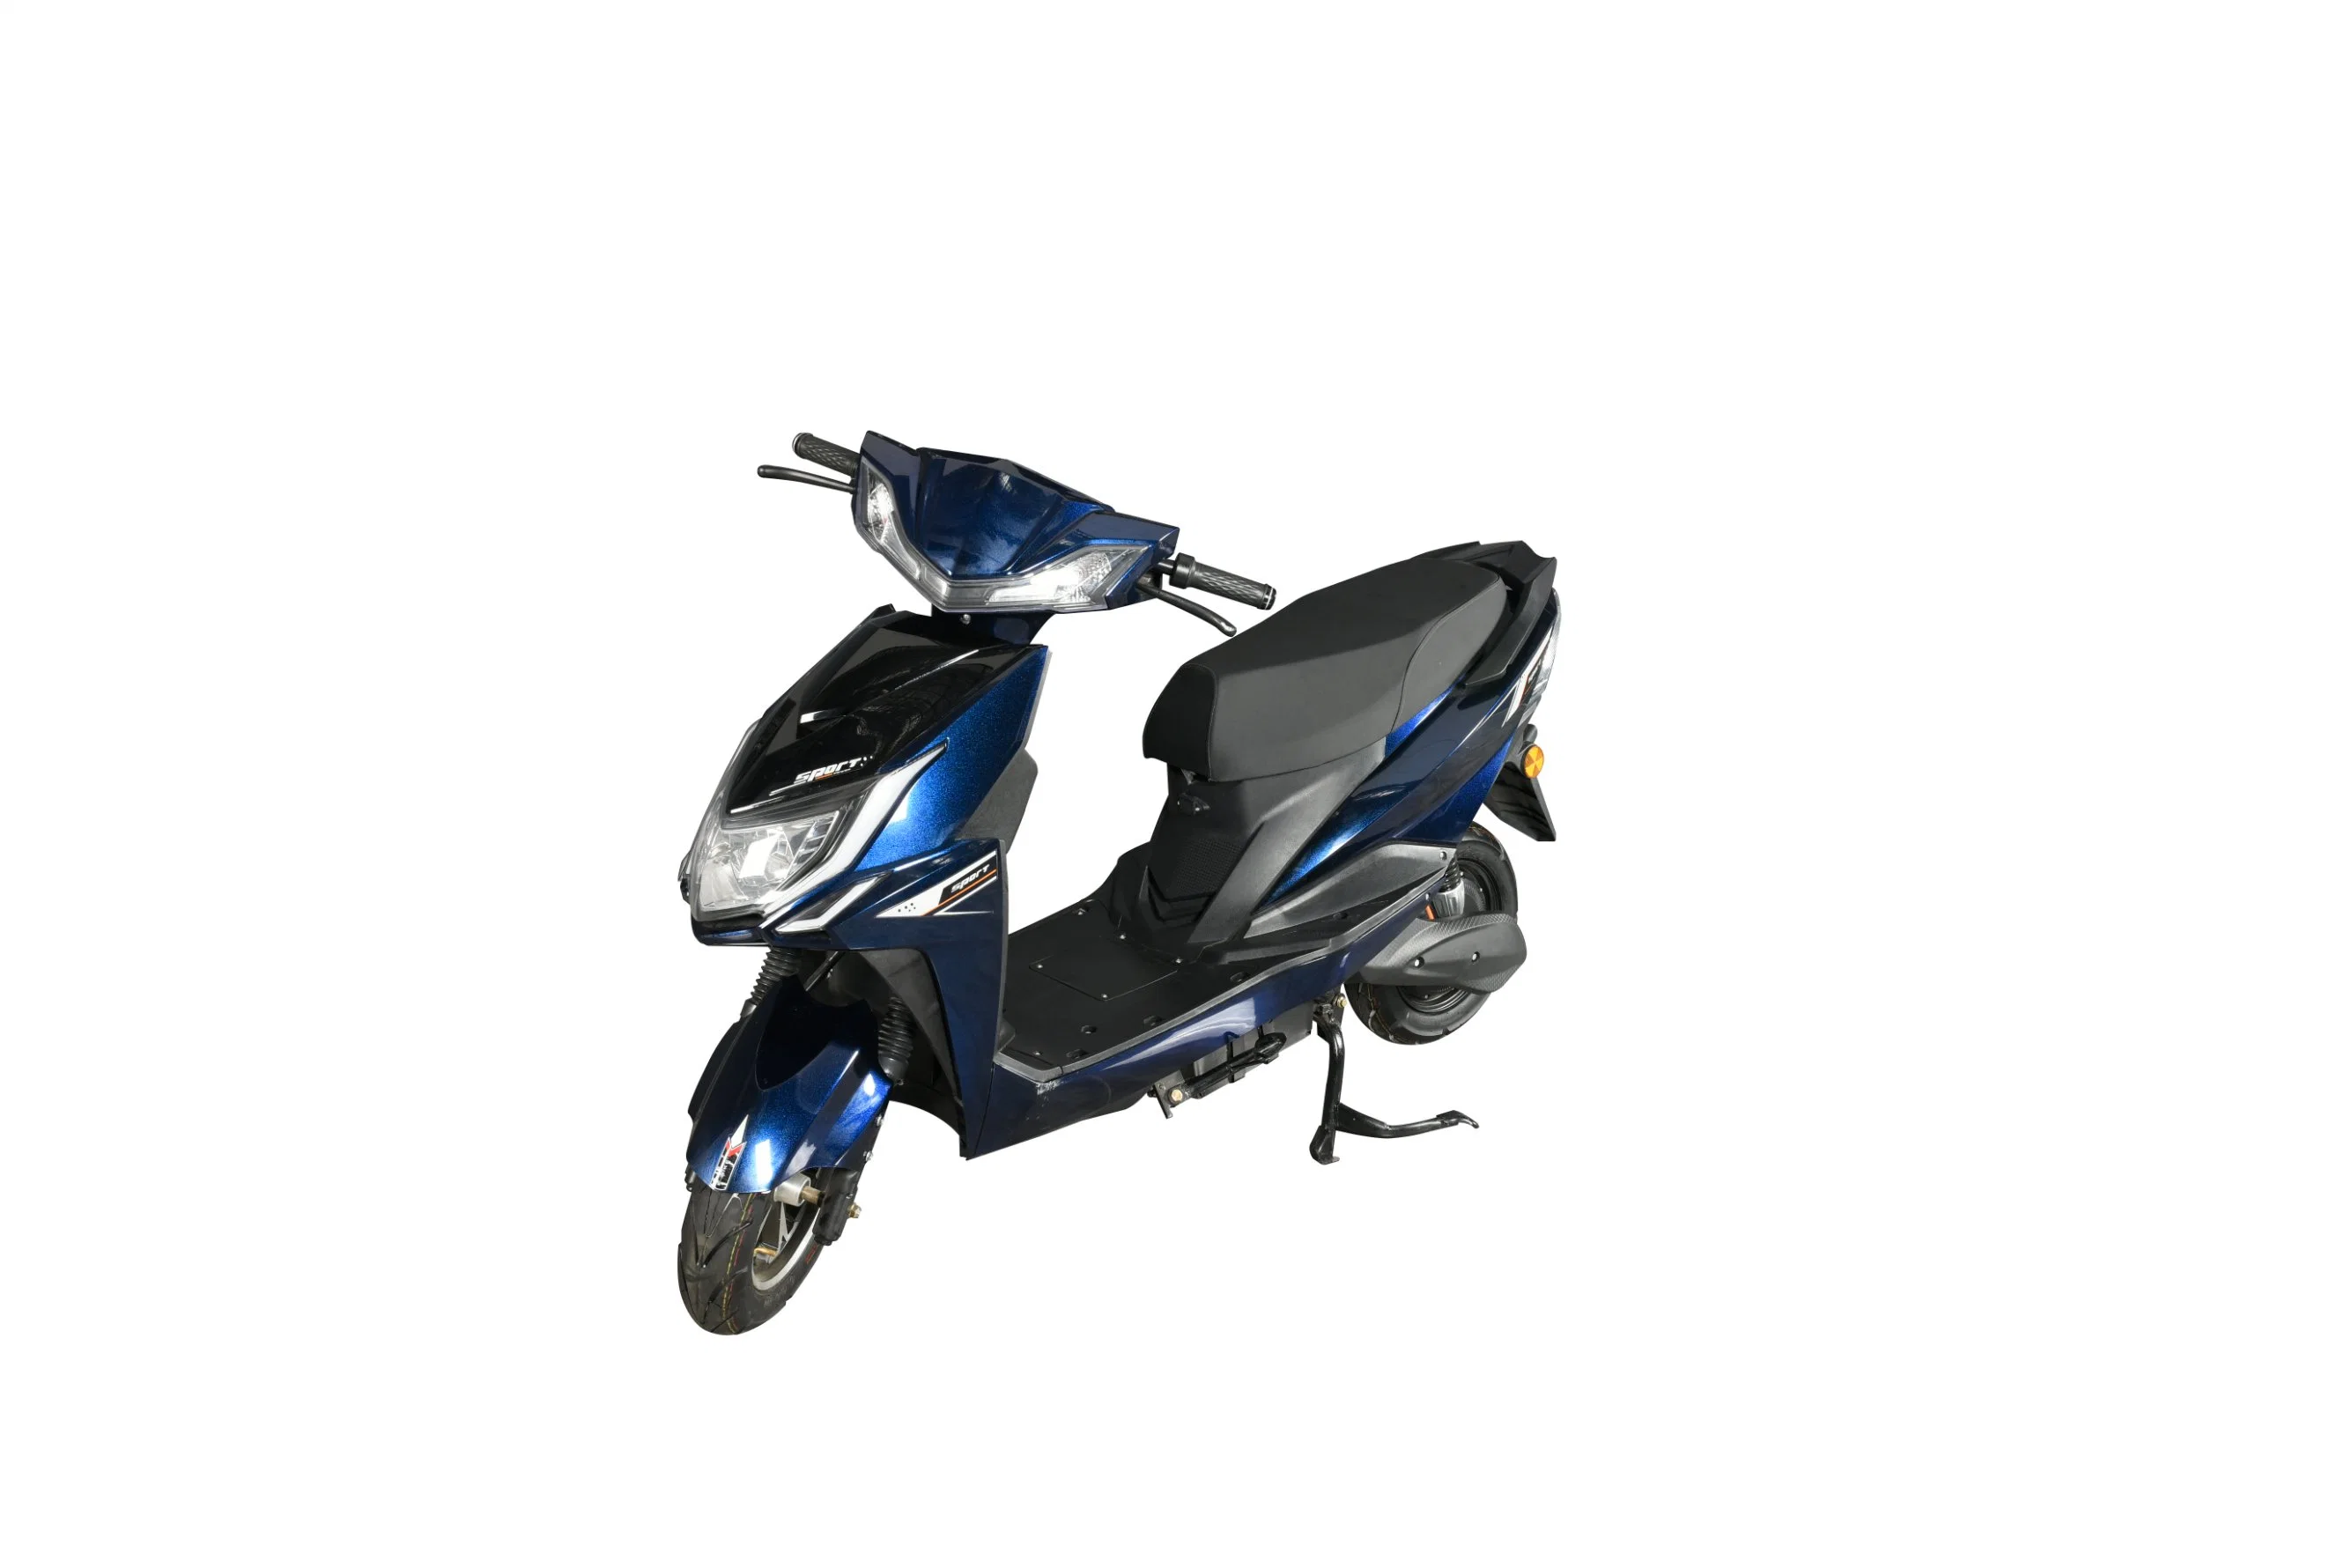 Two Wheel Electric Motorcycle Adult 2 Wheel E Bike Electric Vehicle Electric Motor Scooter for Personal or Passengers